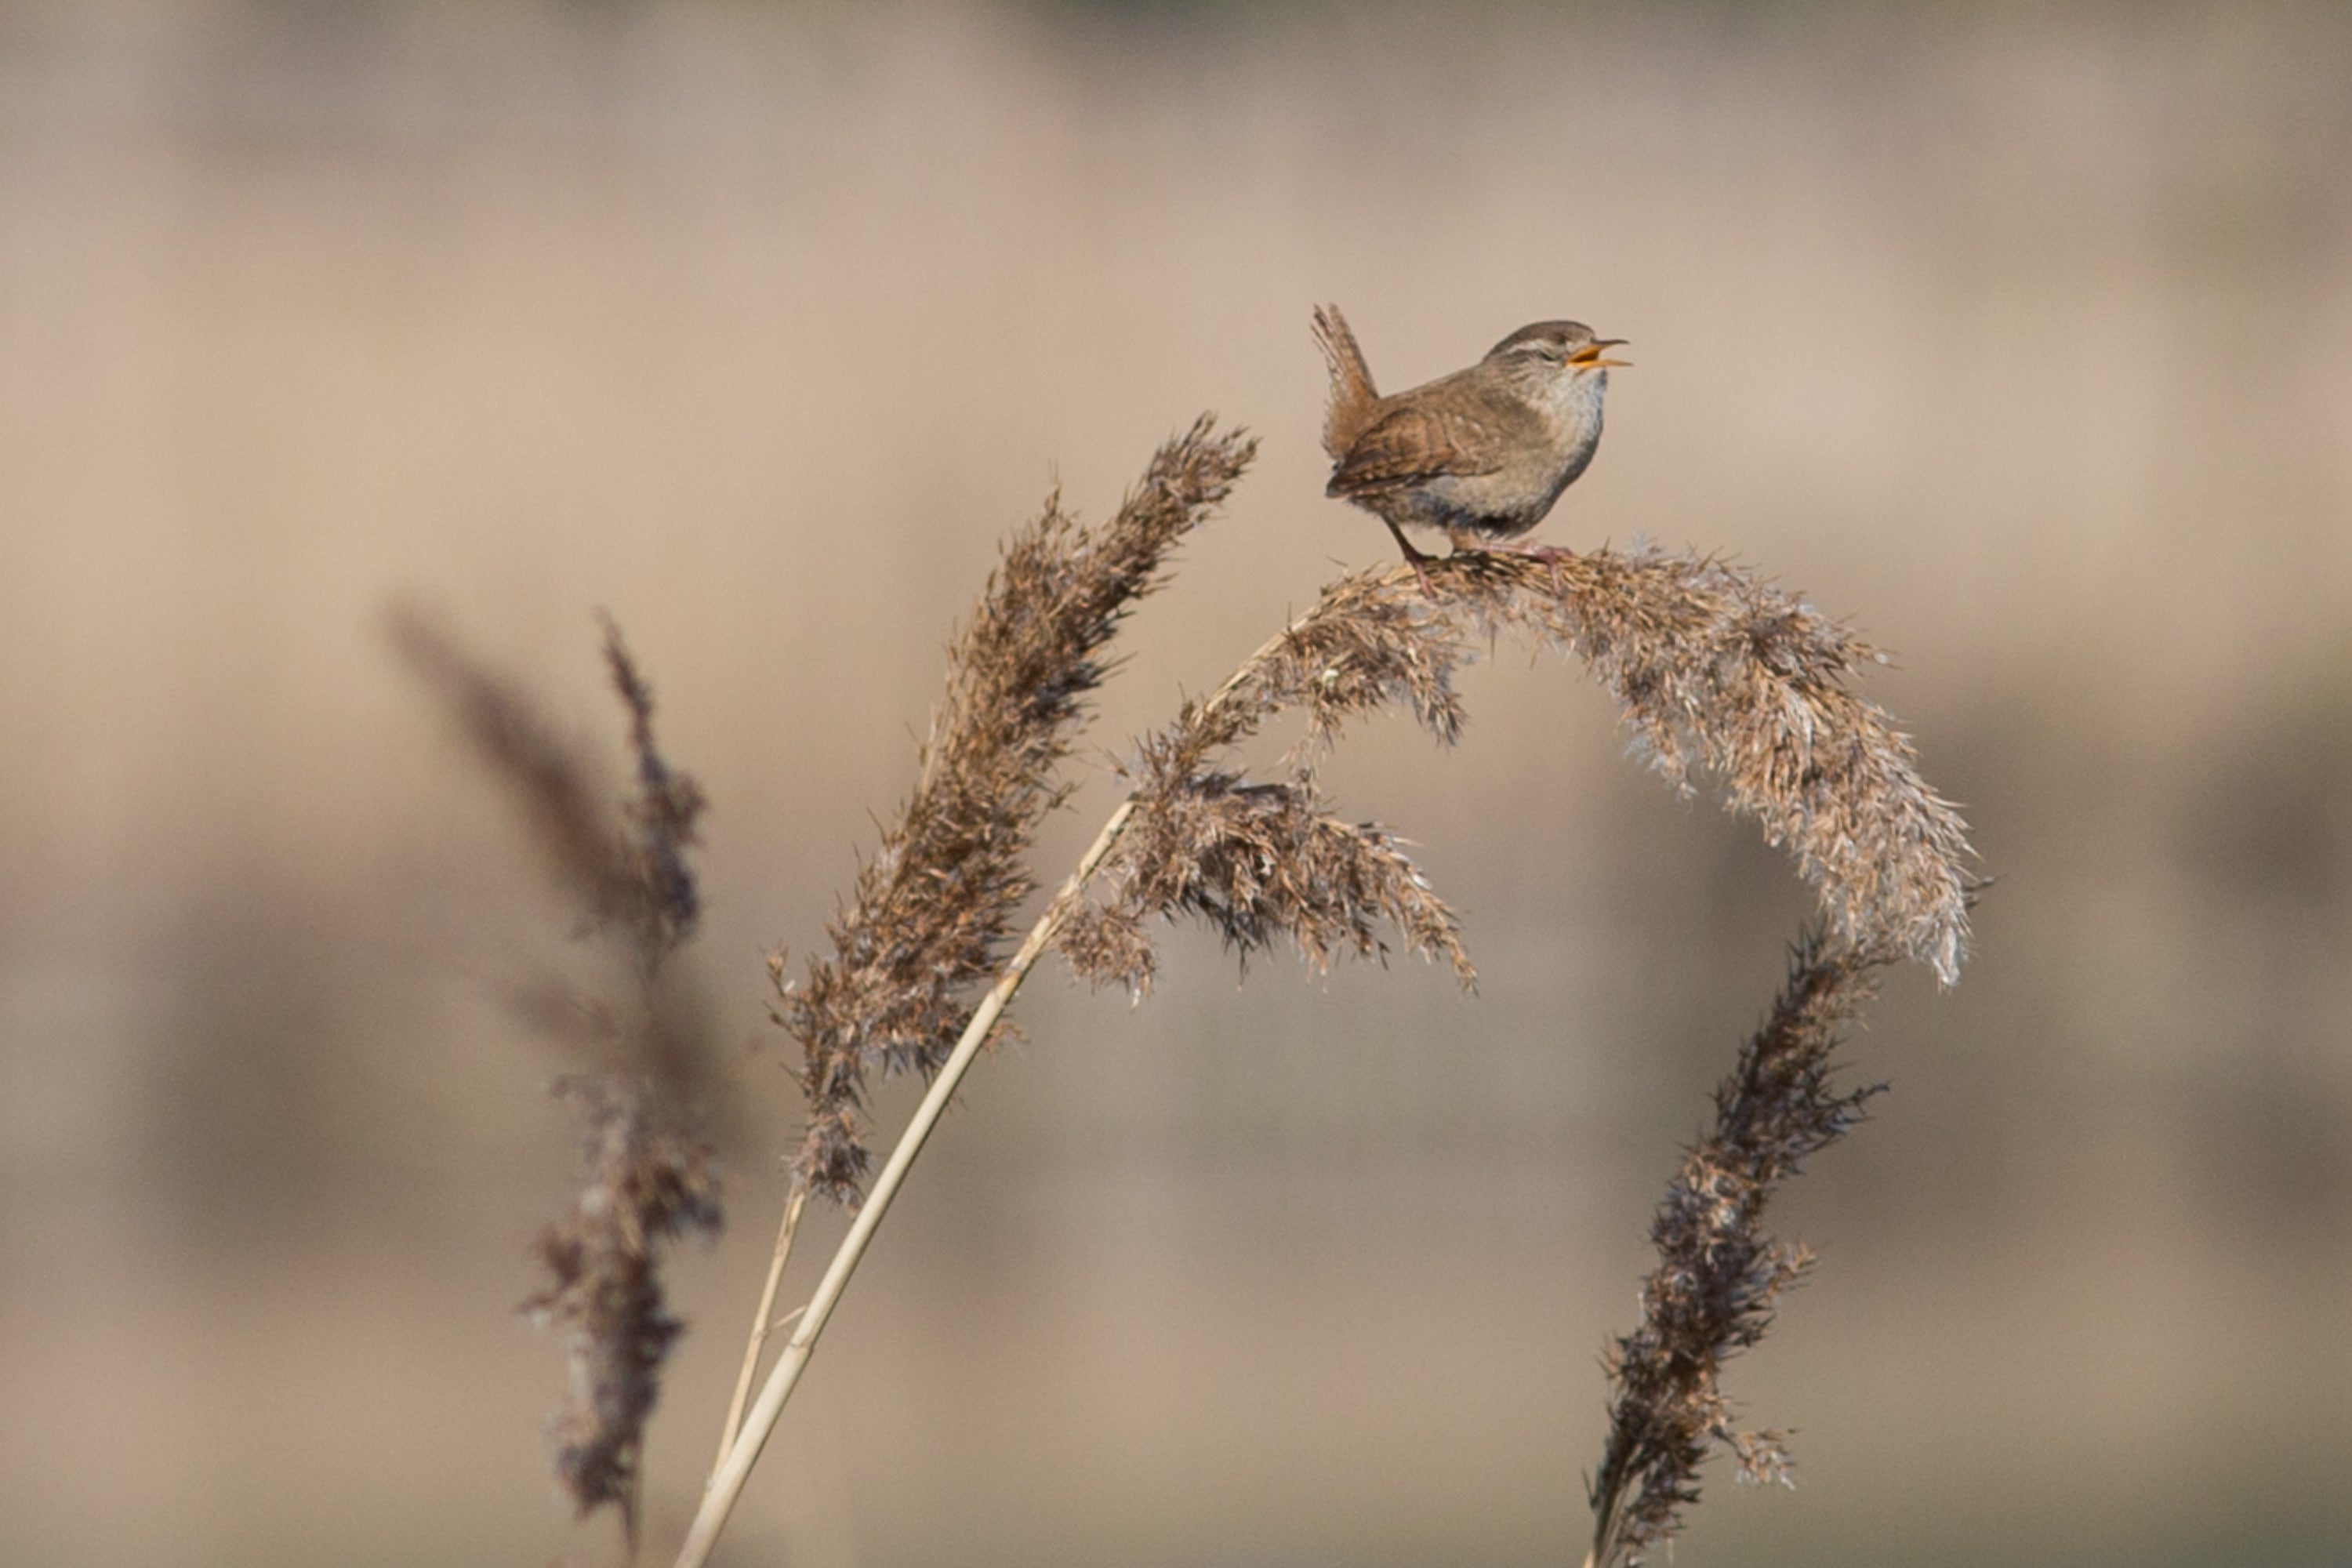 A Wren stands on a reed at Woodberry Wetlands in the Borough of Hackney in London, England